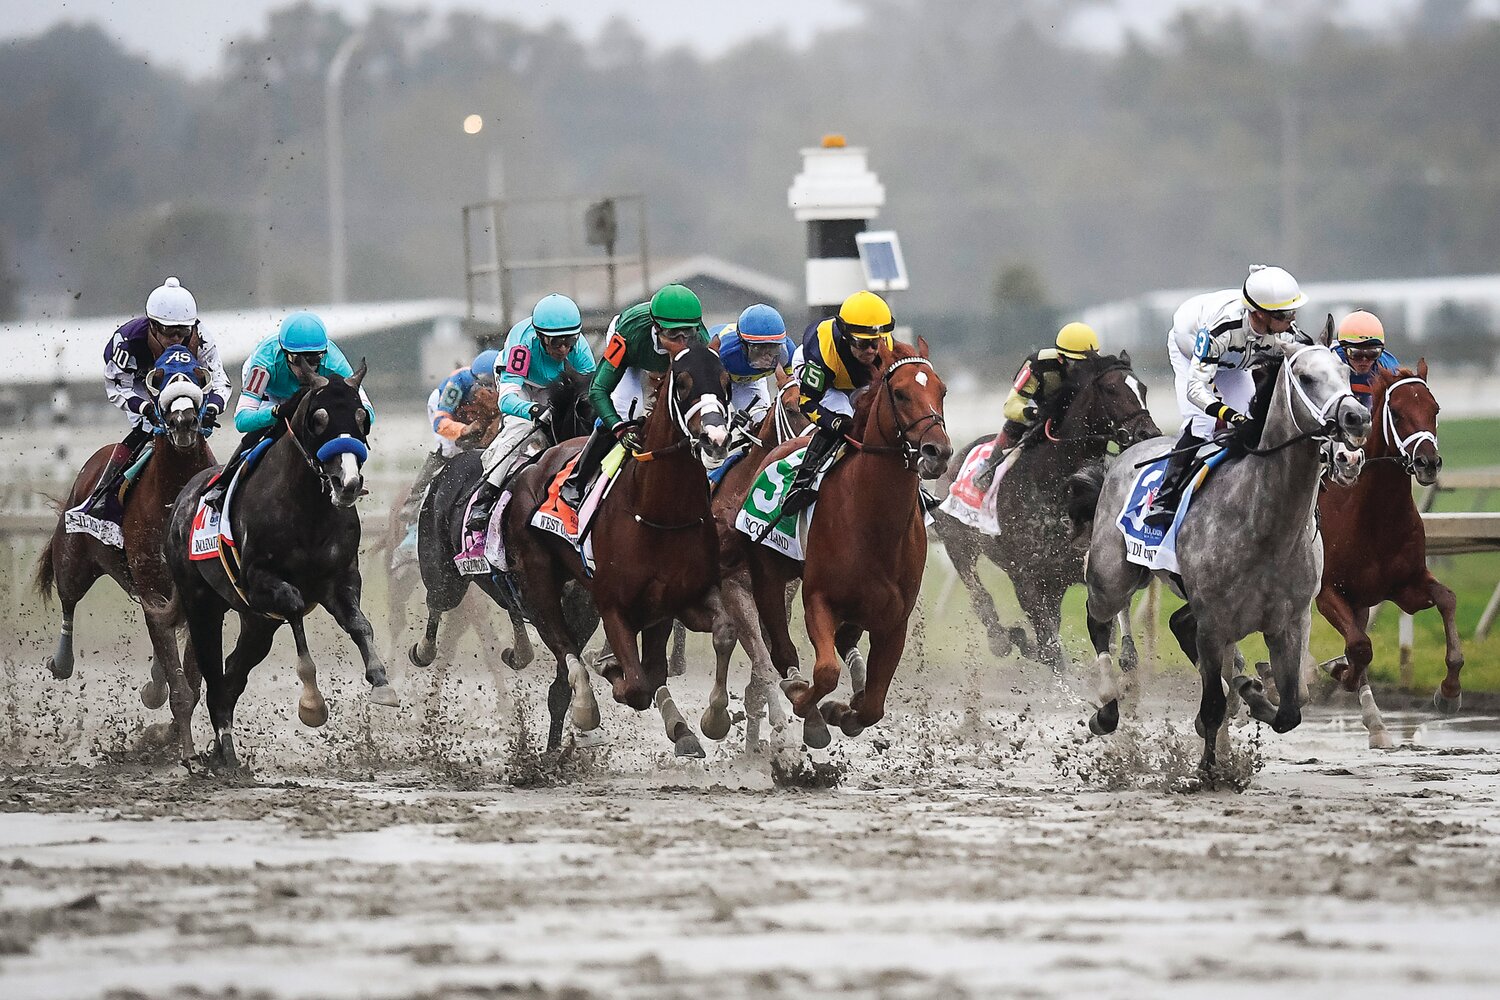 The opening stretch of the Pennsylvania Derby at Parx Racing in Bensalem Sept. 28. The race was won by Saudi Crown, ridden by jockey Florent Geroux. The 3-year-old ran 1 1/8 miles in 1:50.62 on a sloppy track, to capture the $1 million prize. As remnants of Ophelia blanketed the area, it was Jessica Paquette who also took Pennsylvania’s biggest horse racing day by storm, becoming the first female announcer to call a grade 1 stakes.